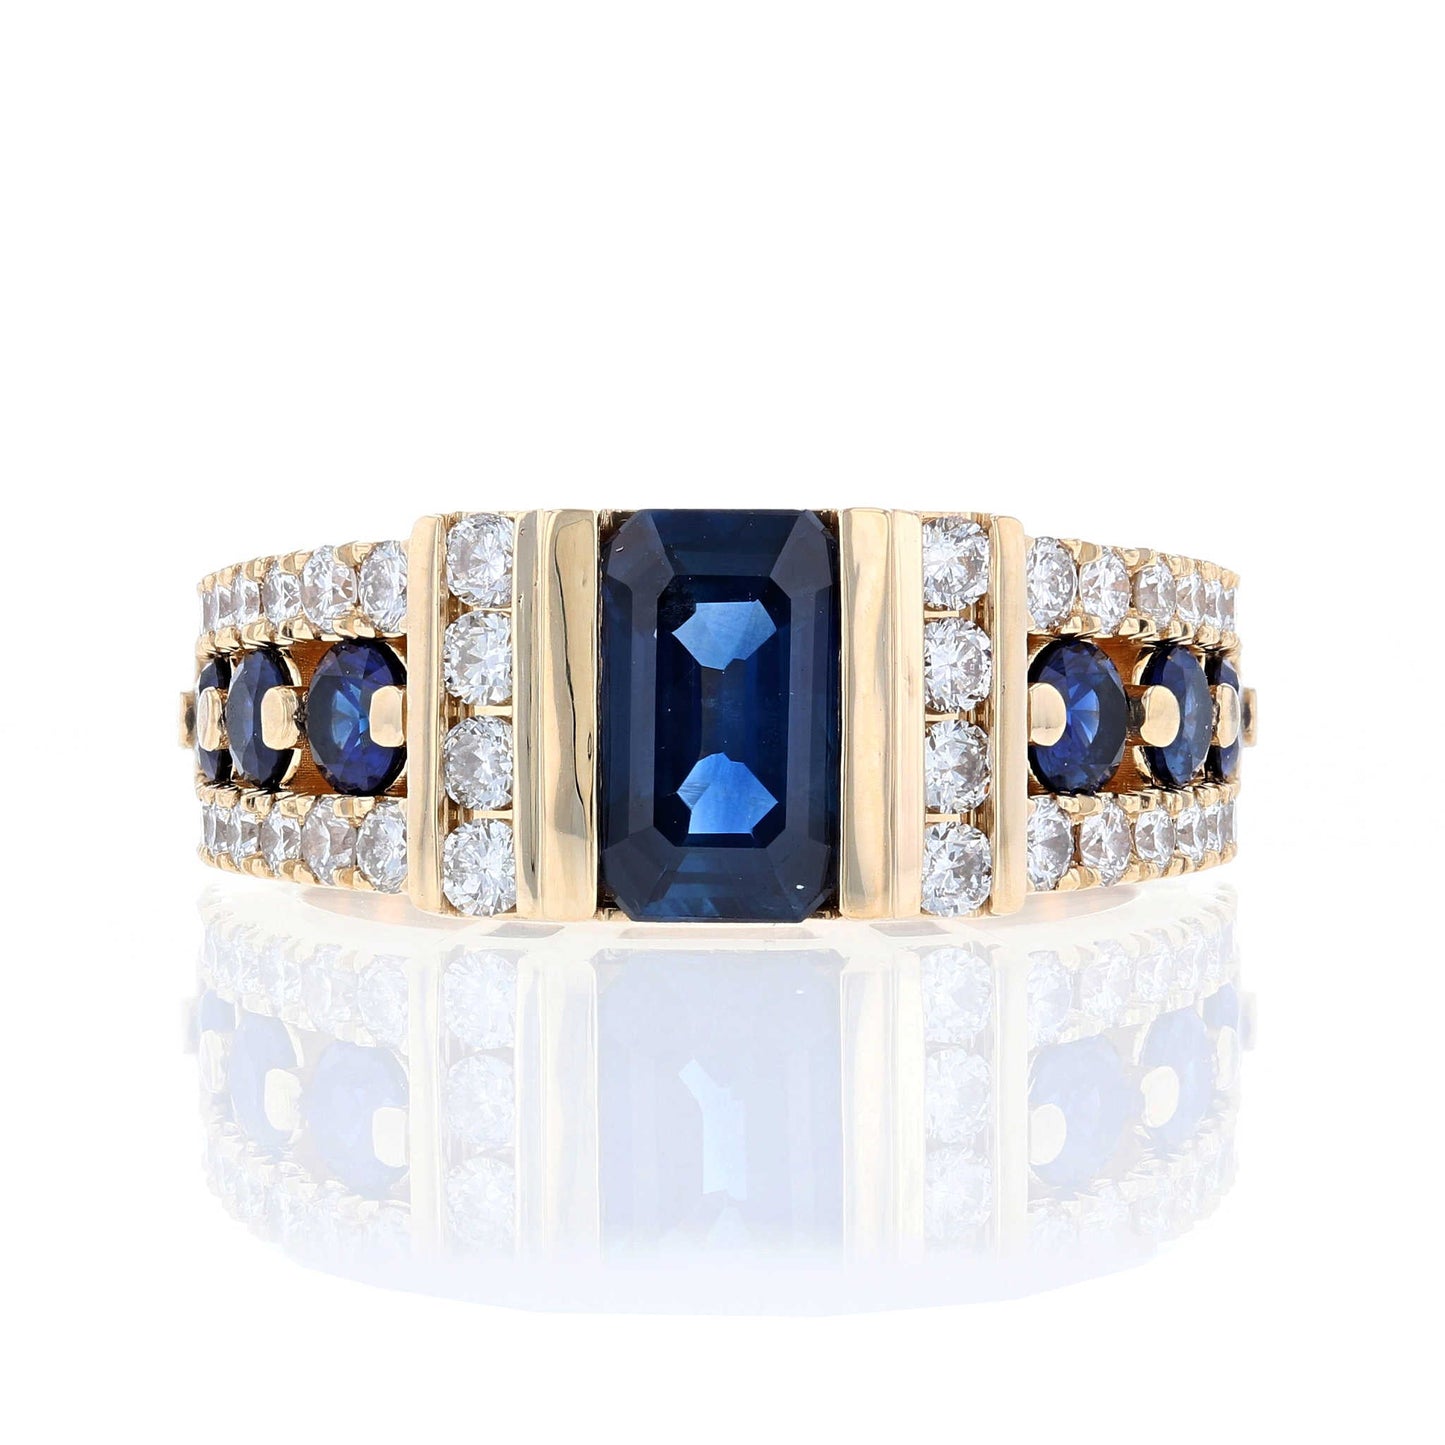 3 Row Sapphire & Diamond Ring Front View